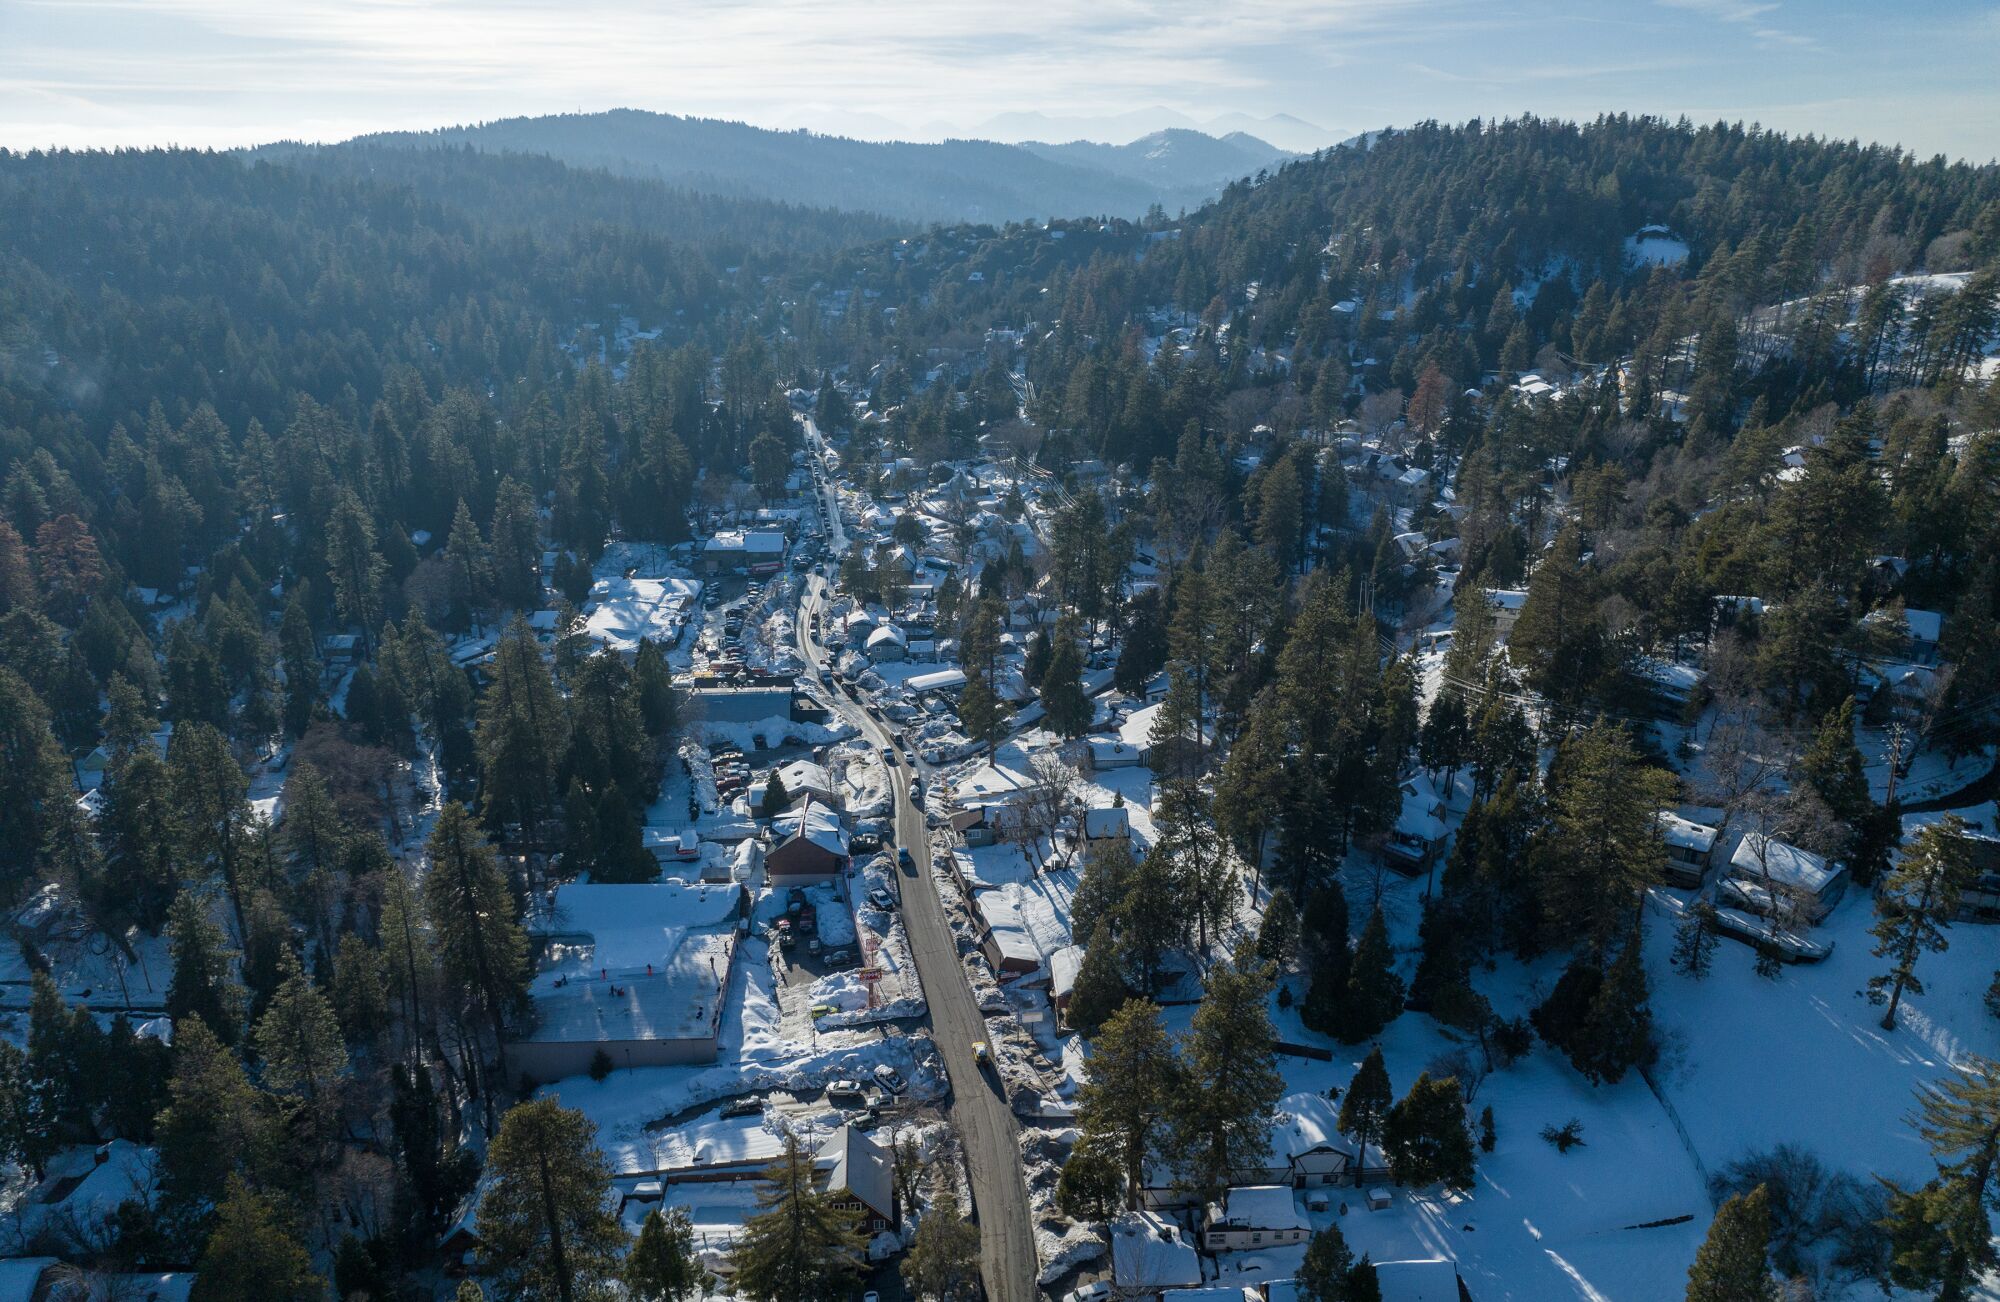 The community of Crestline continues to dig out after successive storms paralyzed the region.